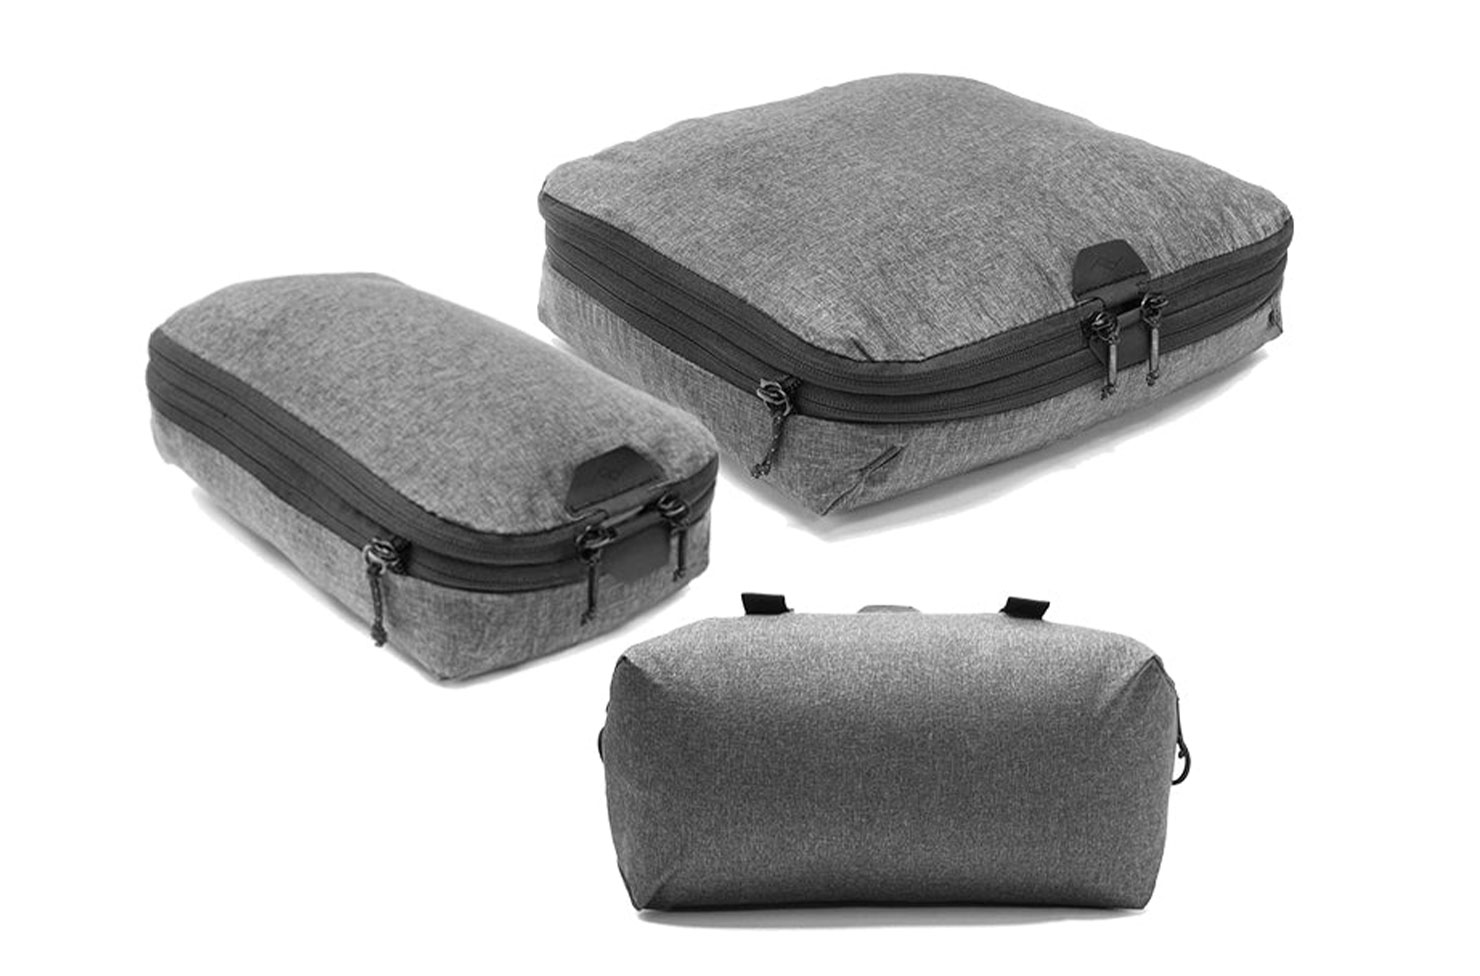 Best gifts for travellers - peak packing cubes